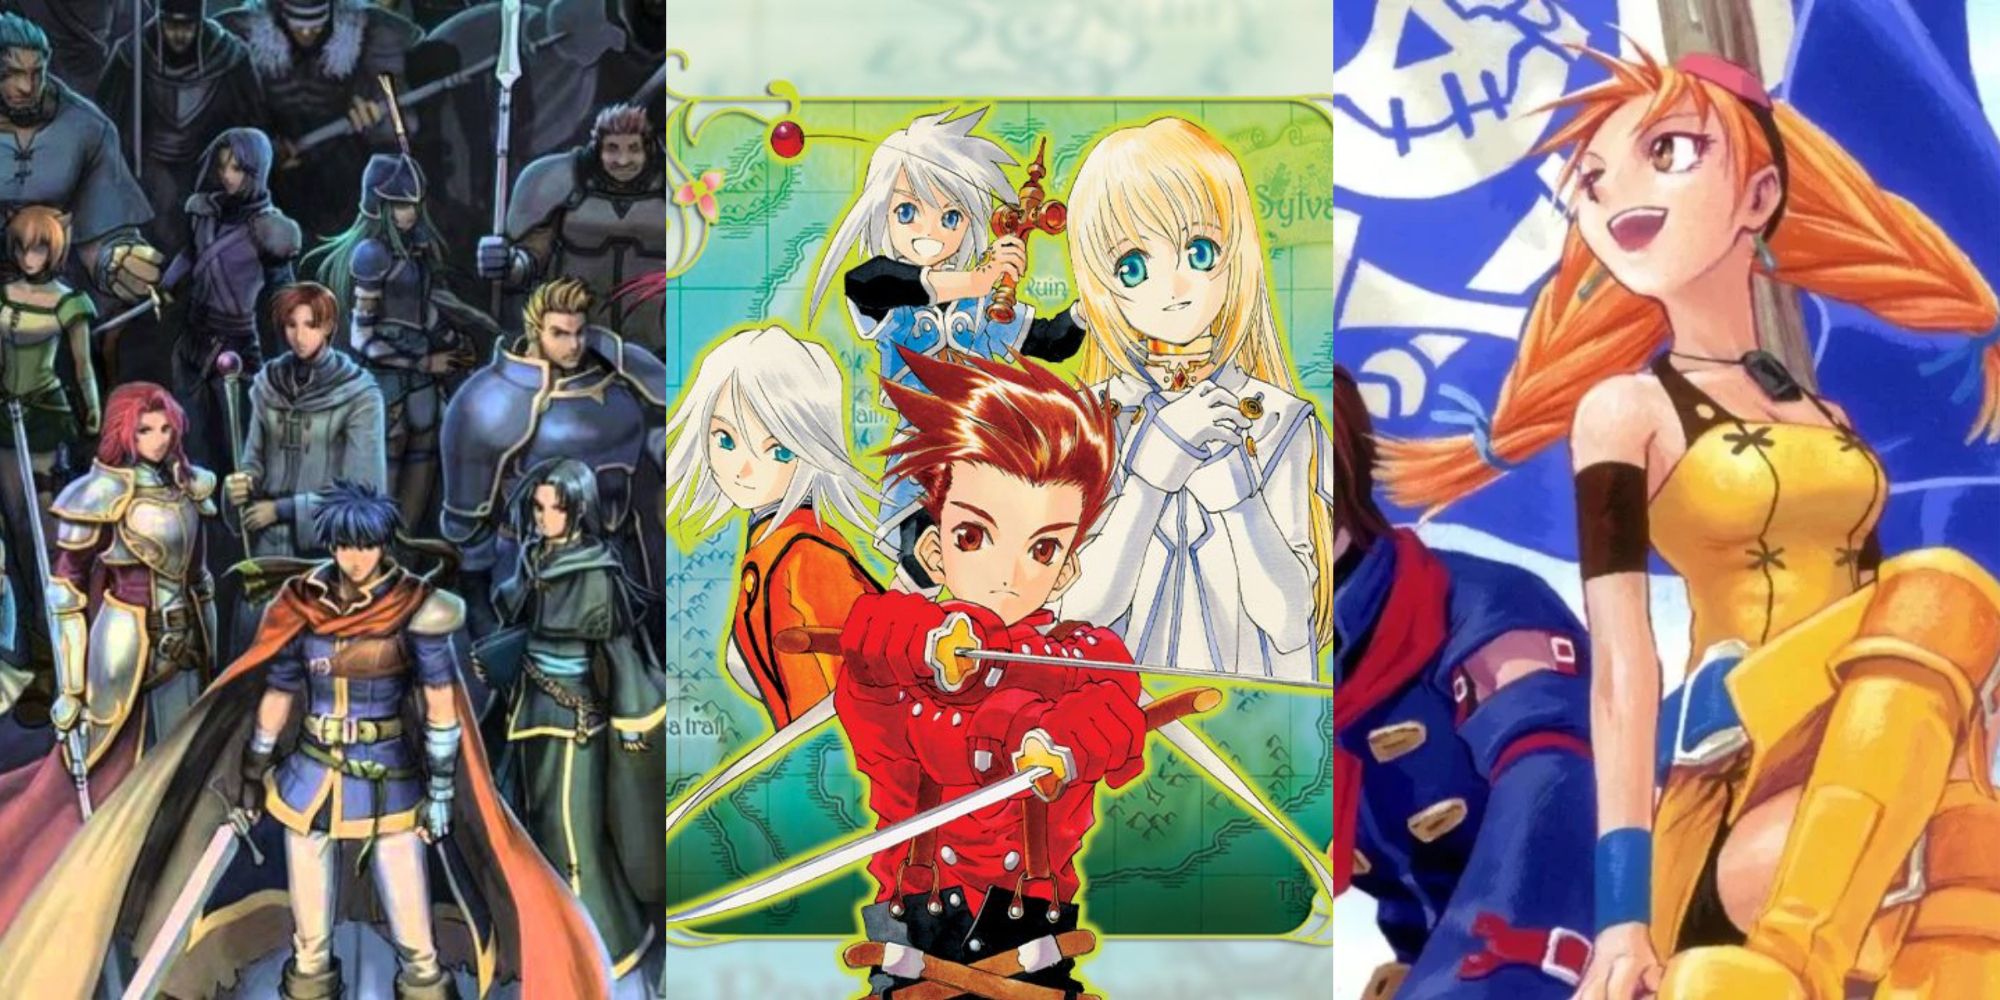 The cast of Fire Emblem Path Of Radiance, The cast of Tales of Symphonia, and some of the cast of Skies Of Arcadia